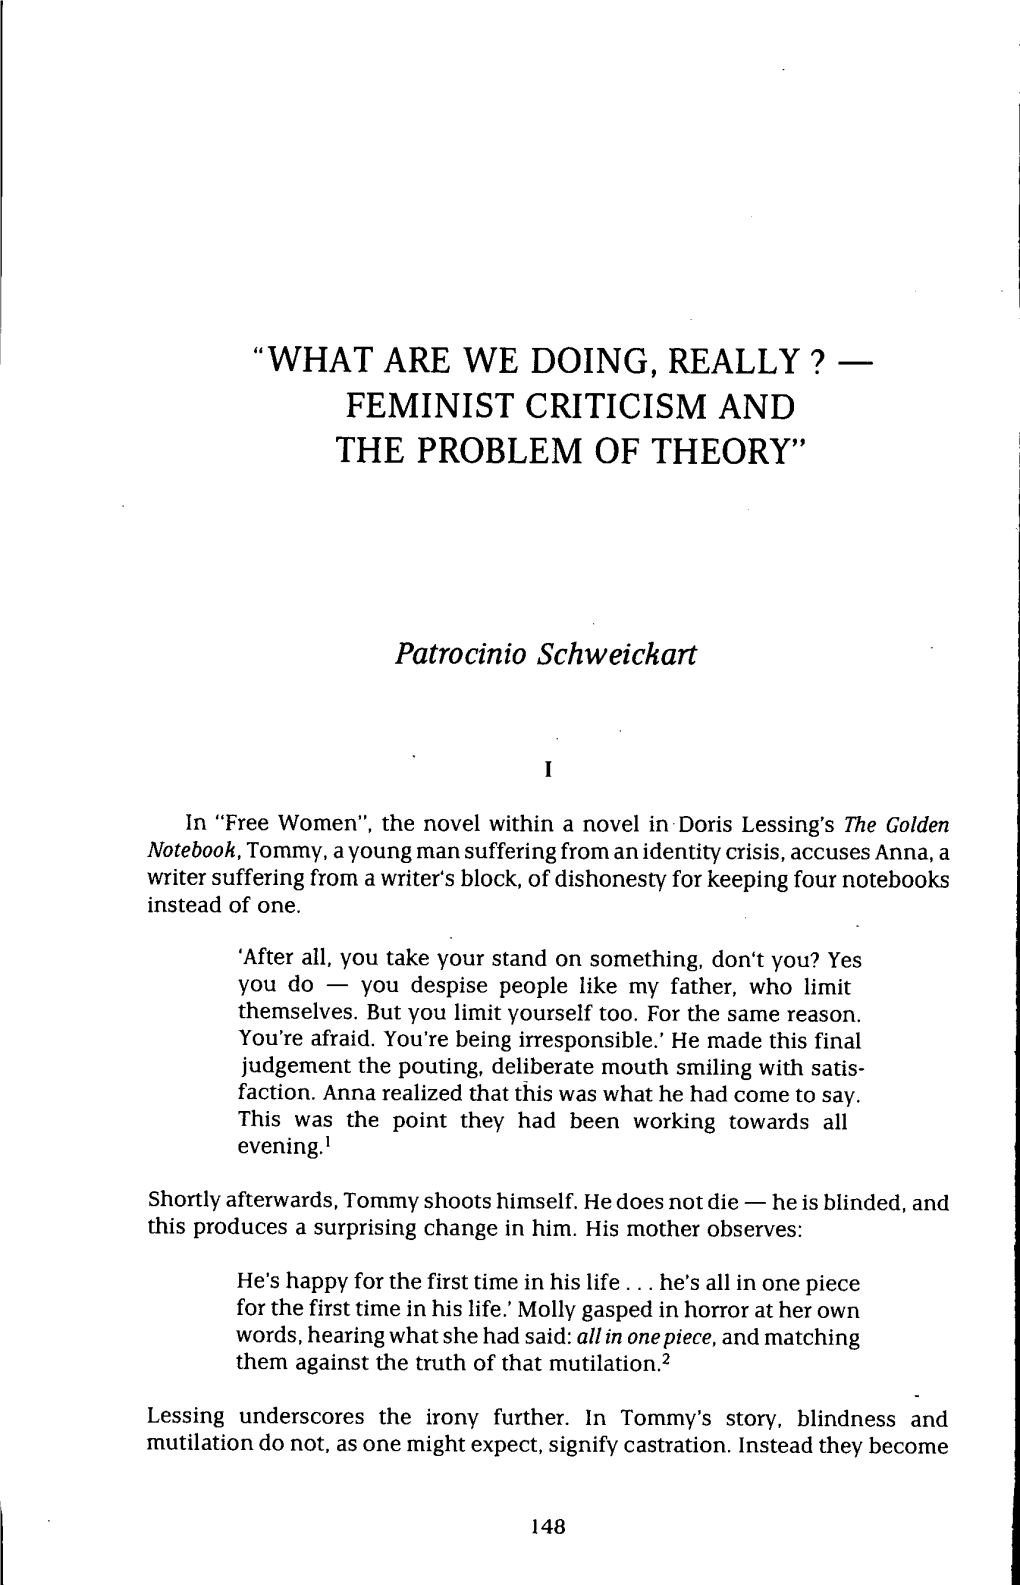 "What Are We Doing, Really? - Feminist Criticism and the Problem of Theory"